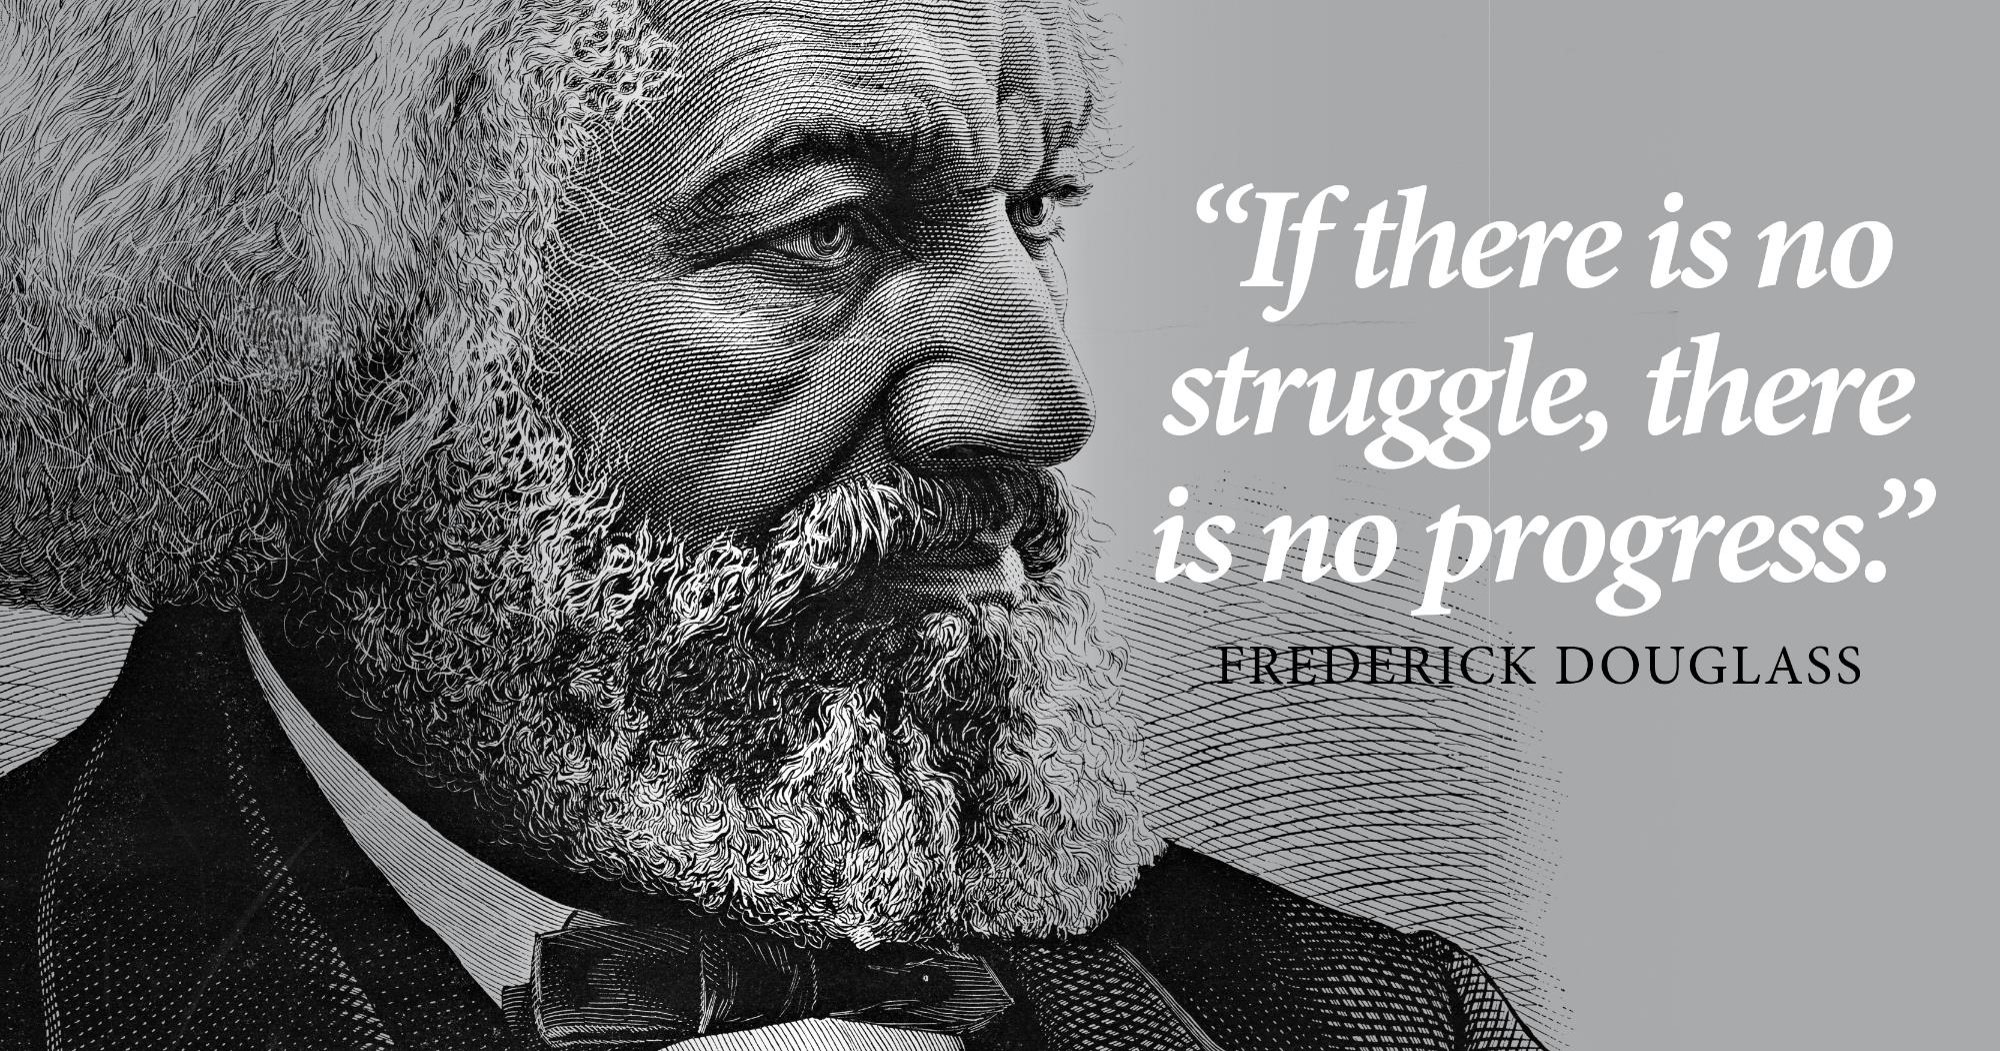 "If there is no struggle, there is no progress." Frederick Douglass